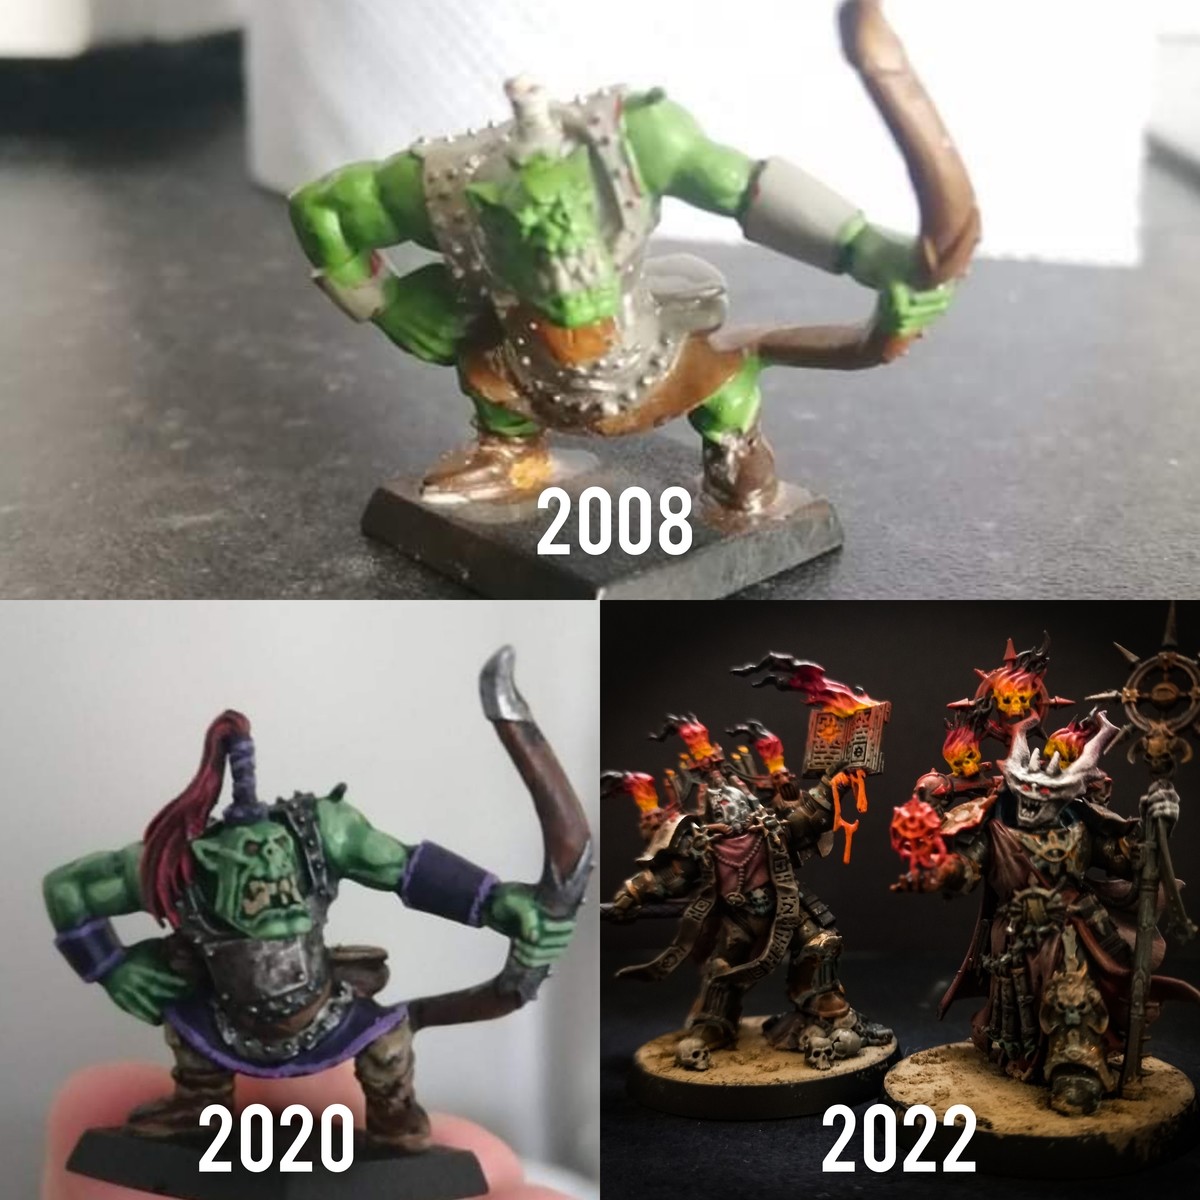 What a journey so far. I initially got back into painting when I decided to try restore some of my old lord of the rings models then some of my random warhammer